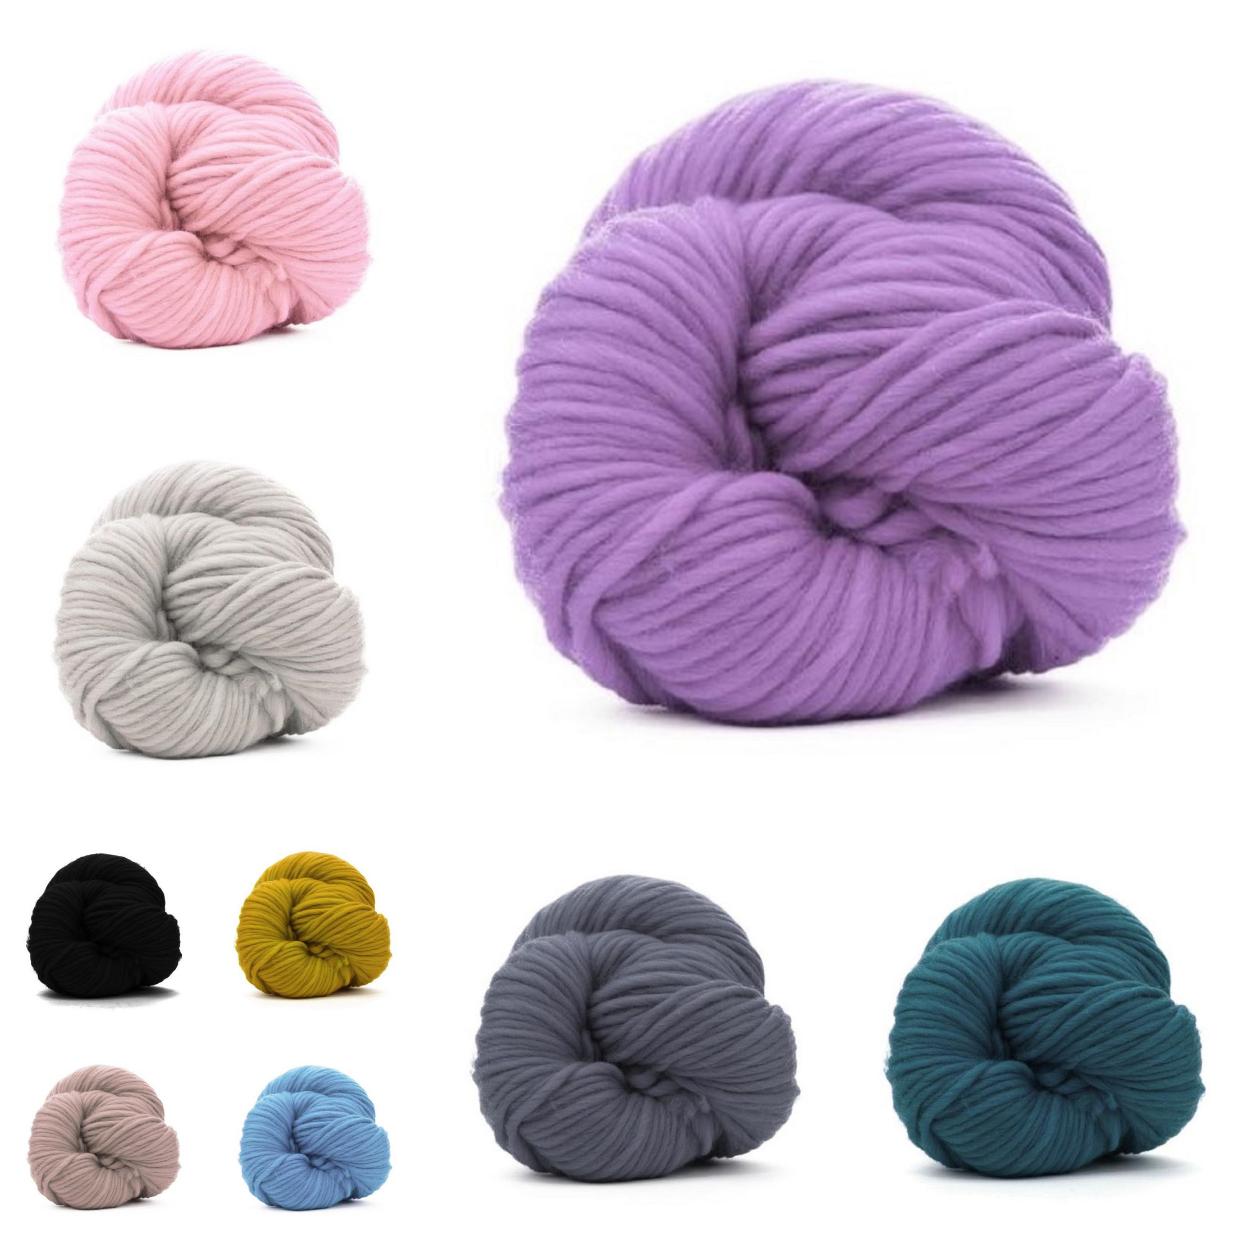 Premium Super Bulky (Chunky) Weight Solid Color Merino Yarn